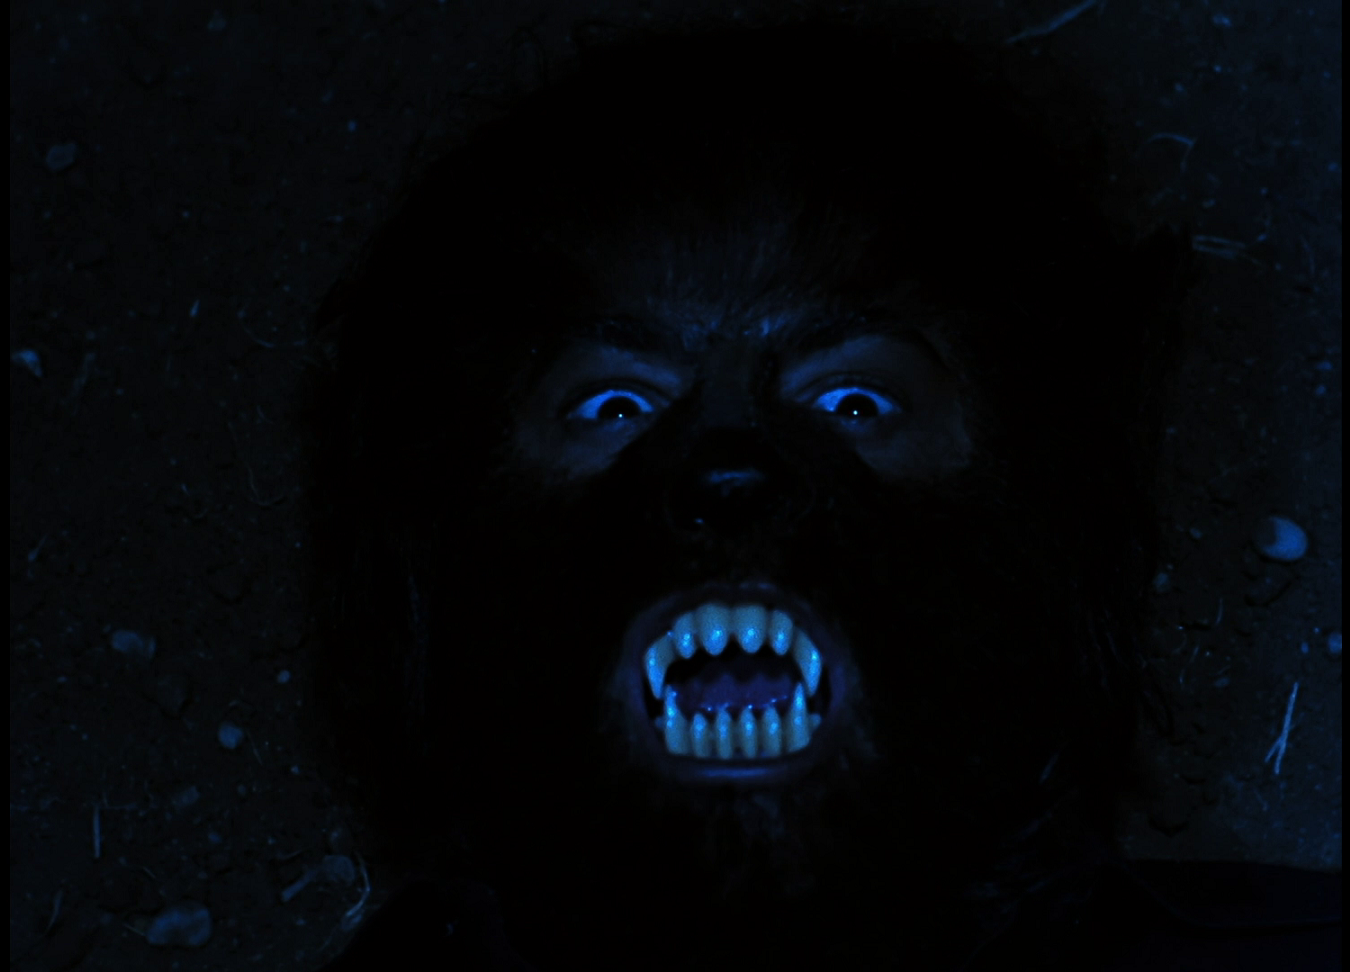 Episode 492: The Werewolf and the Yeti (AKA: Night of the Howling